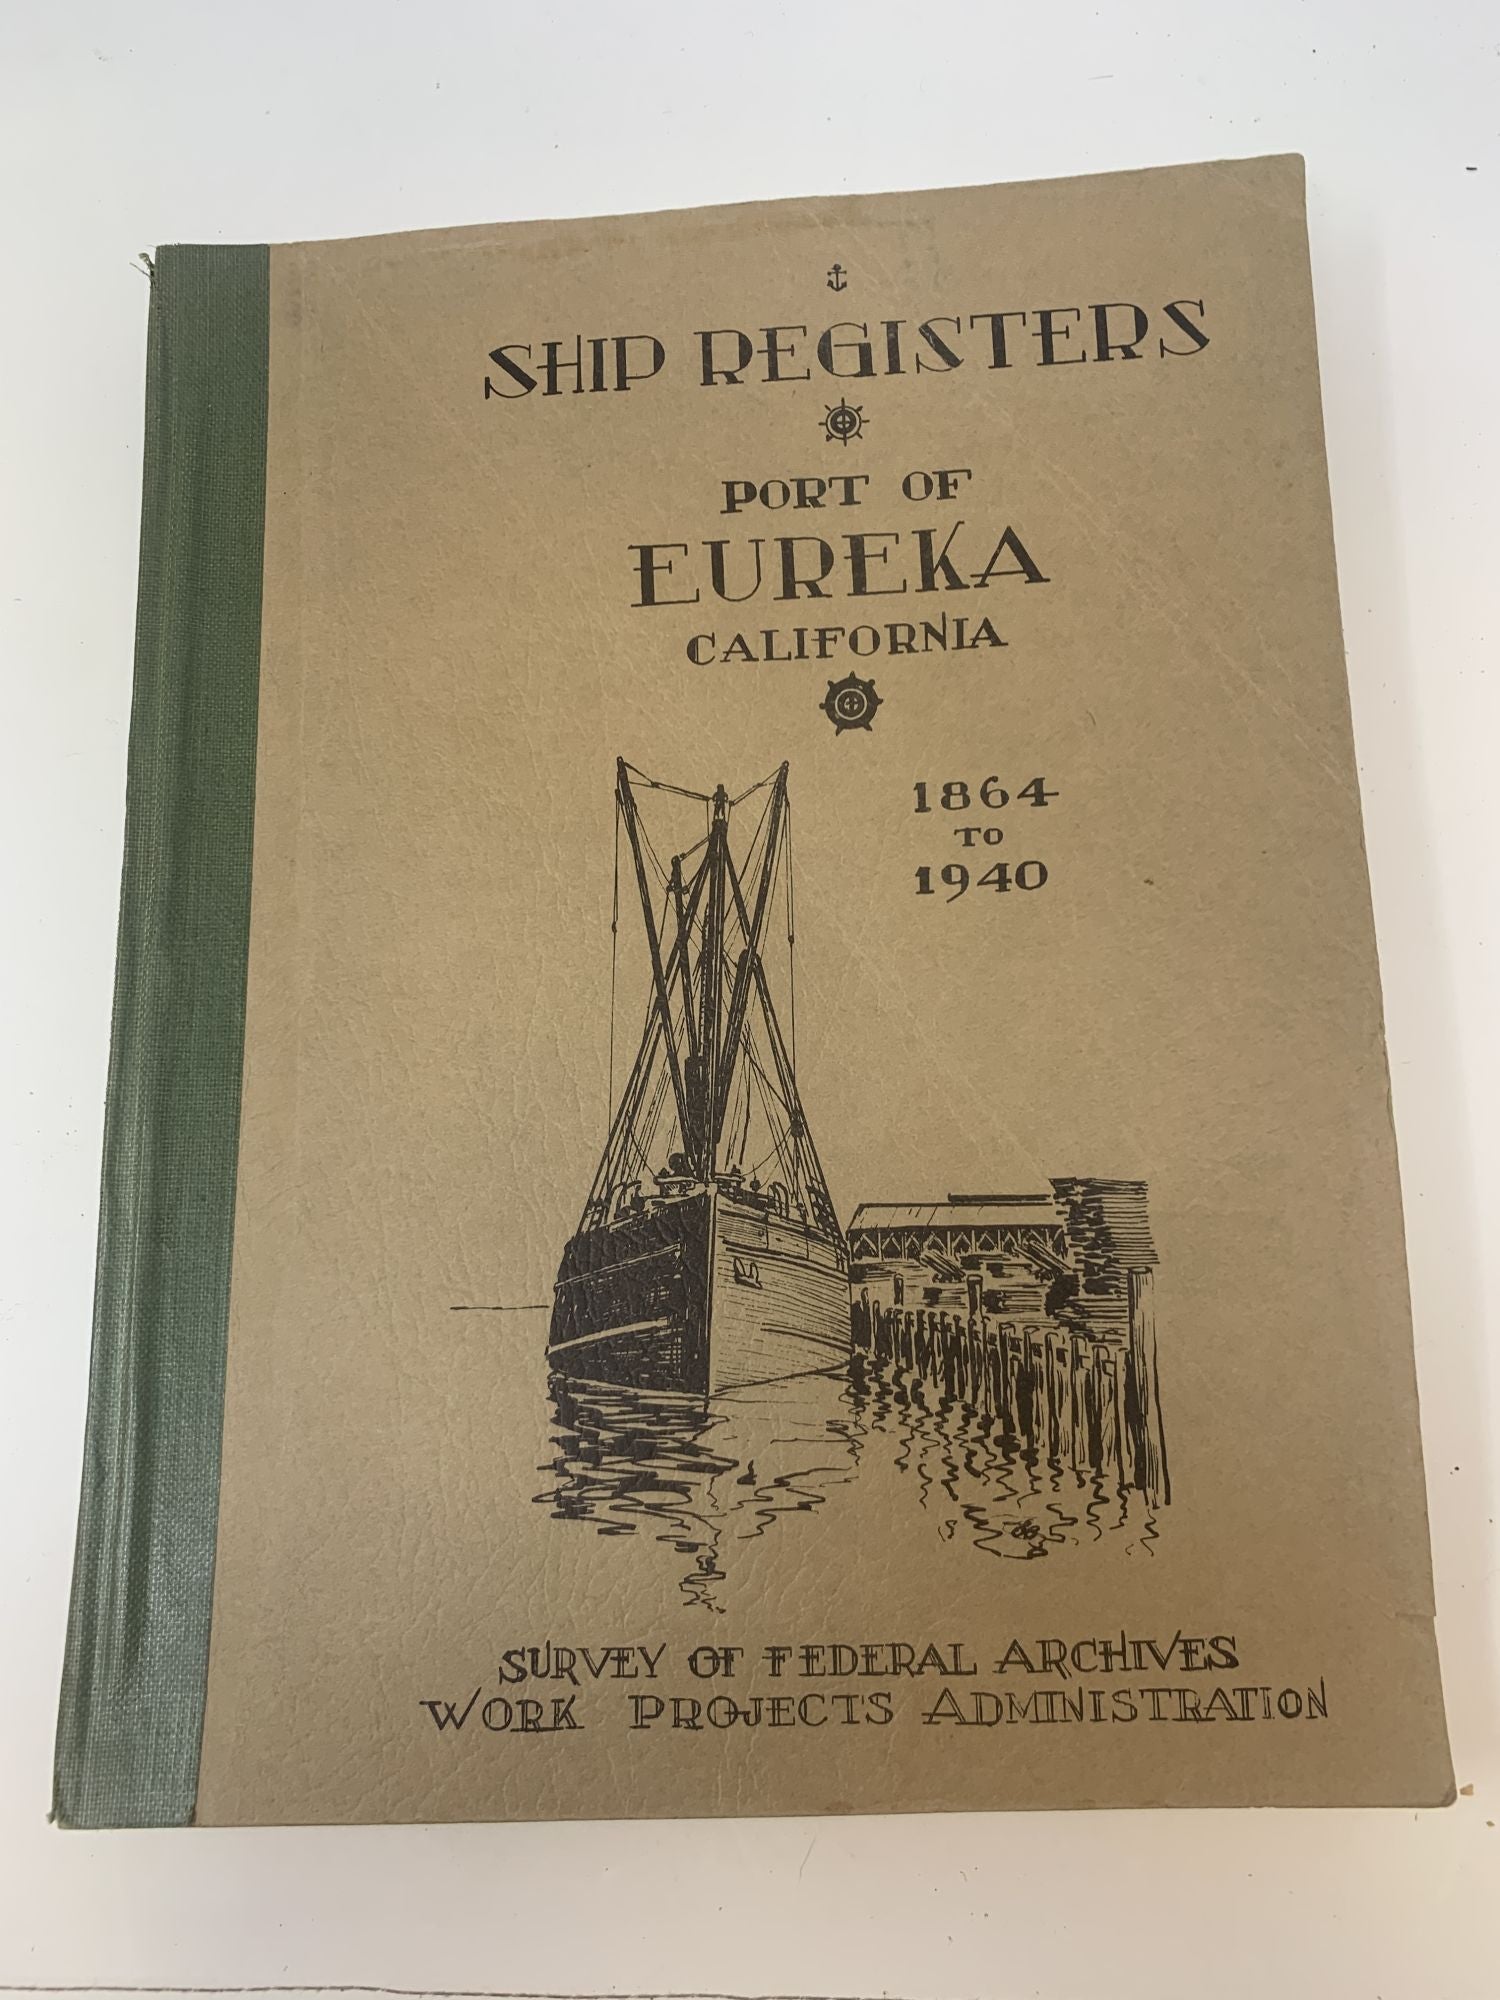 Survey of Federal Archives, Division of Community Service Programs Works Projects Administration - Ship Registries and Enrollments Port of Eureka, California 1859-1920